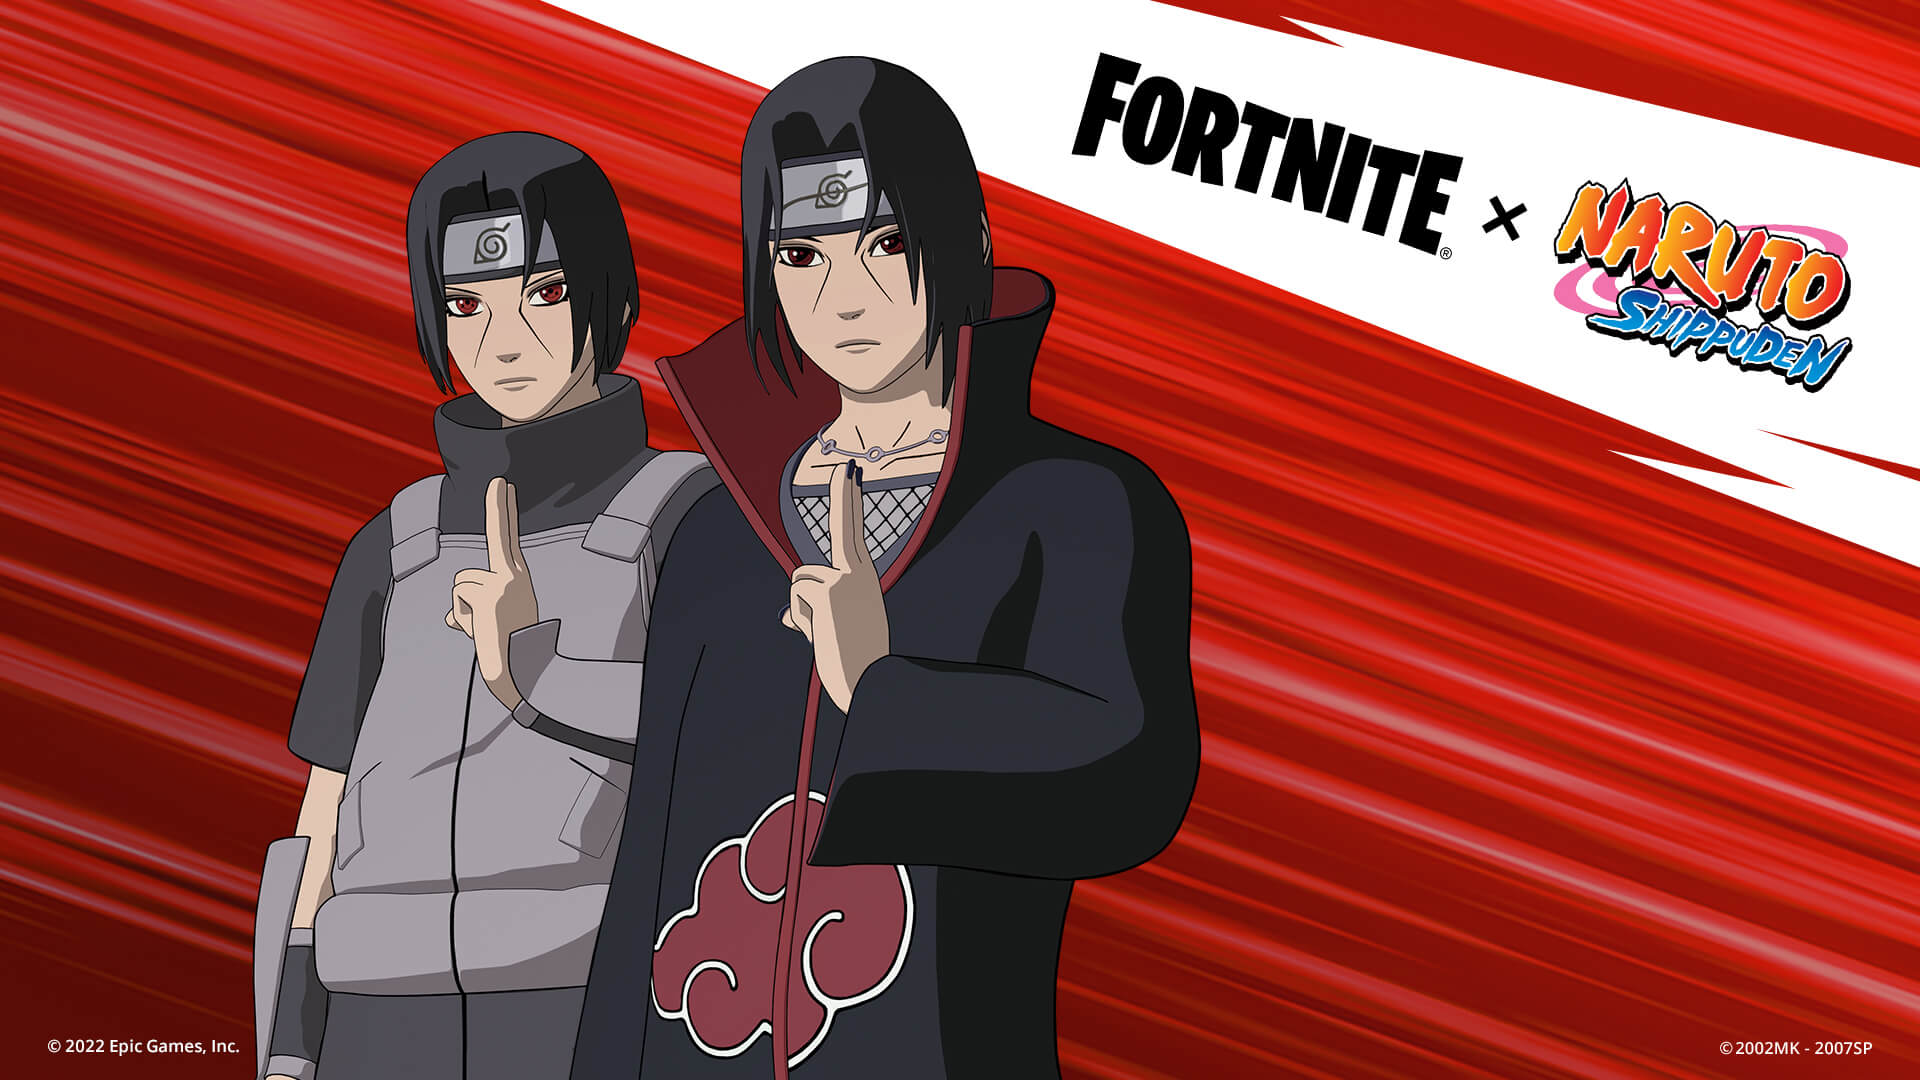 Fortnite introduces more skins and items from Naruto and the ability to  fight against Darth Vader